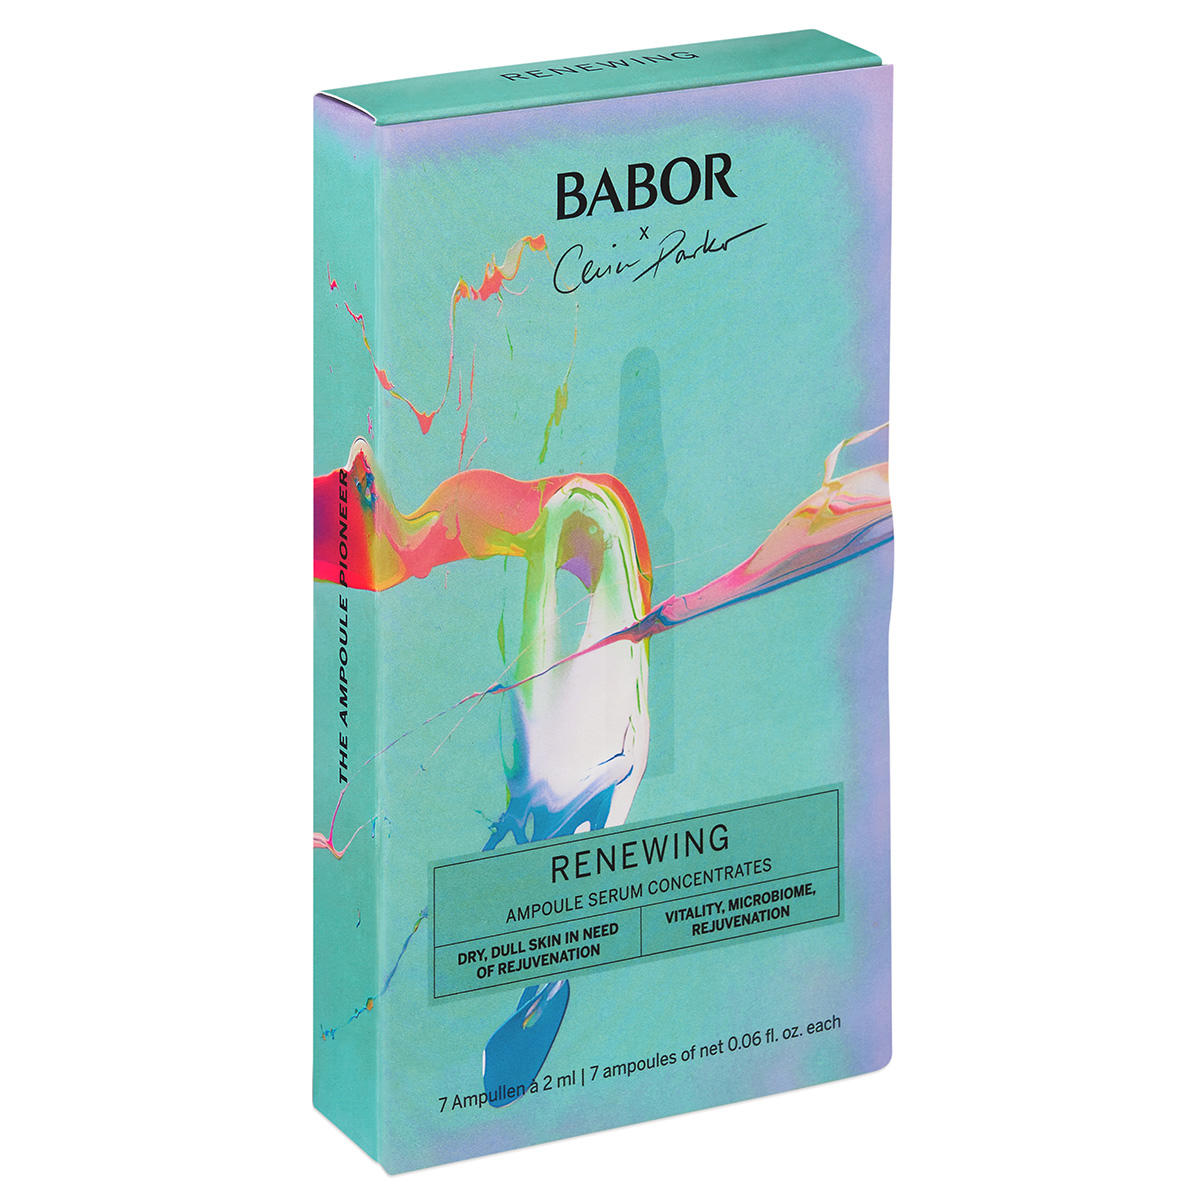 BABOR AMPOULE CONCENTRATES Vernieuwende Ampul Limited Editie 7 x 2 ml - 2